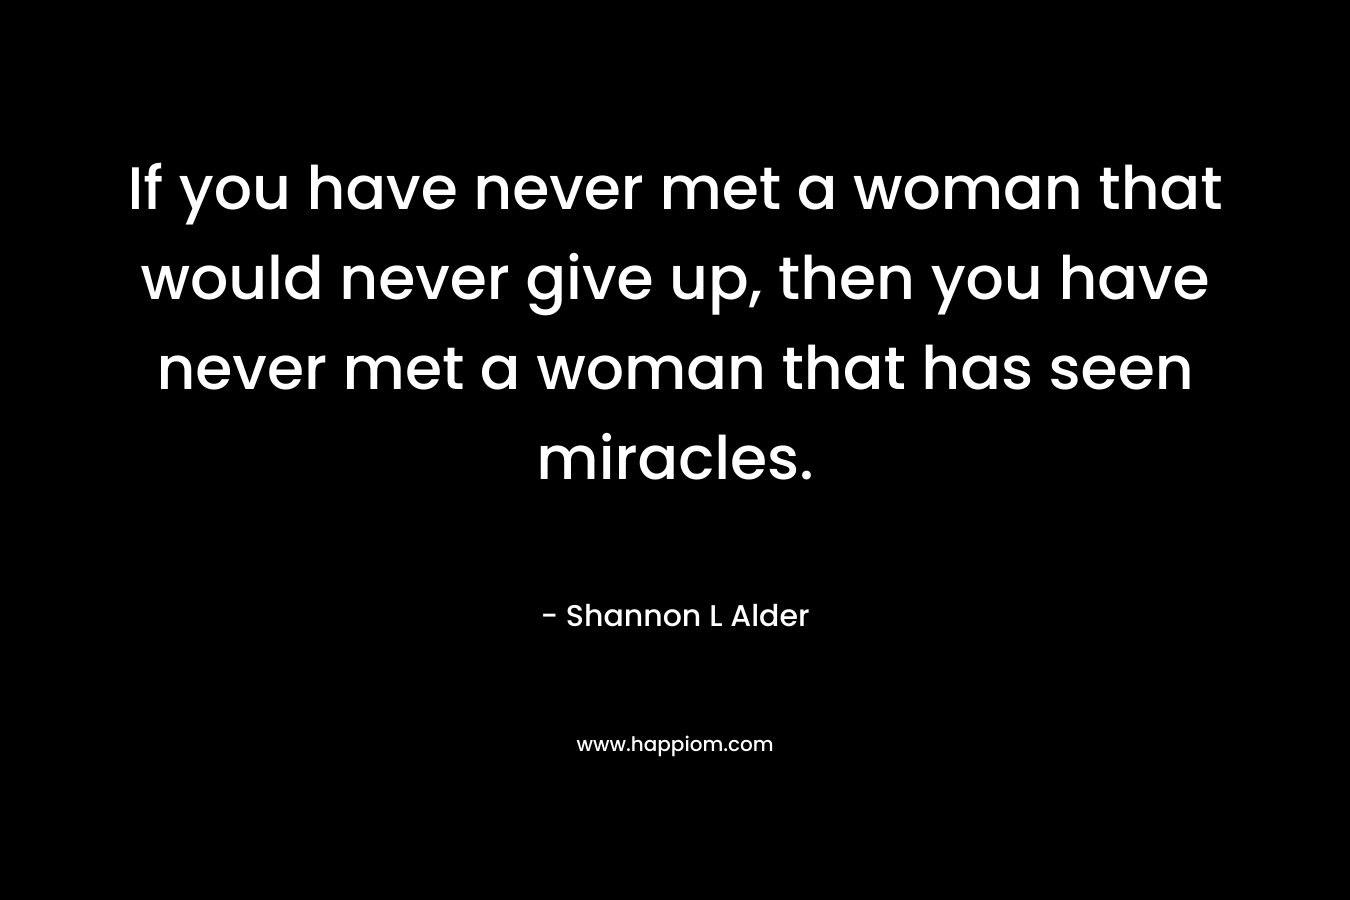 If you have never met a woman that would never give up, then you have never met a woman that has seen miracles.